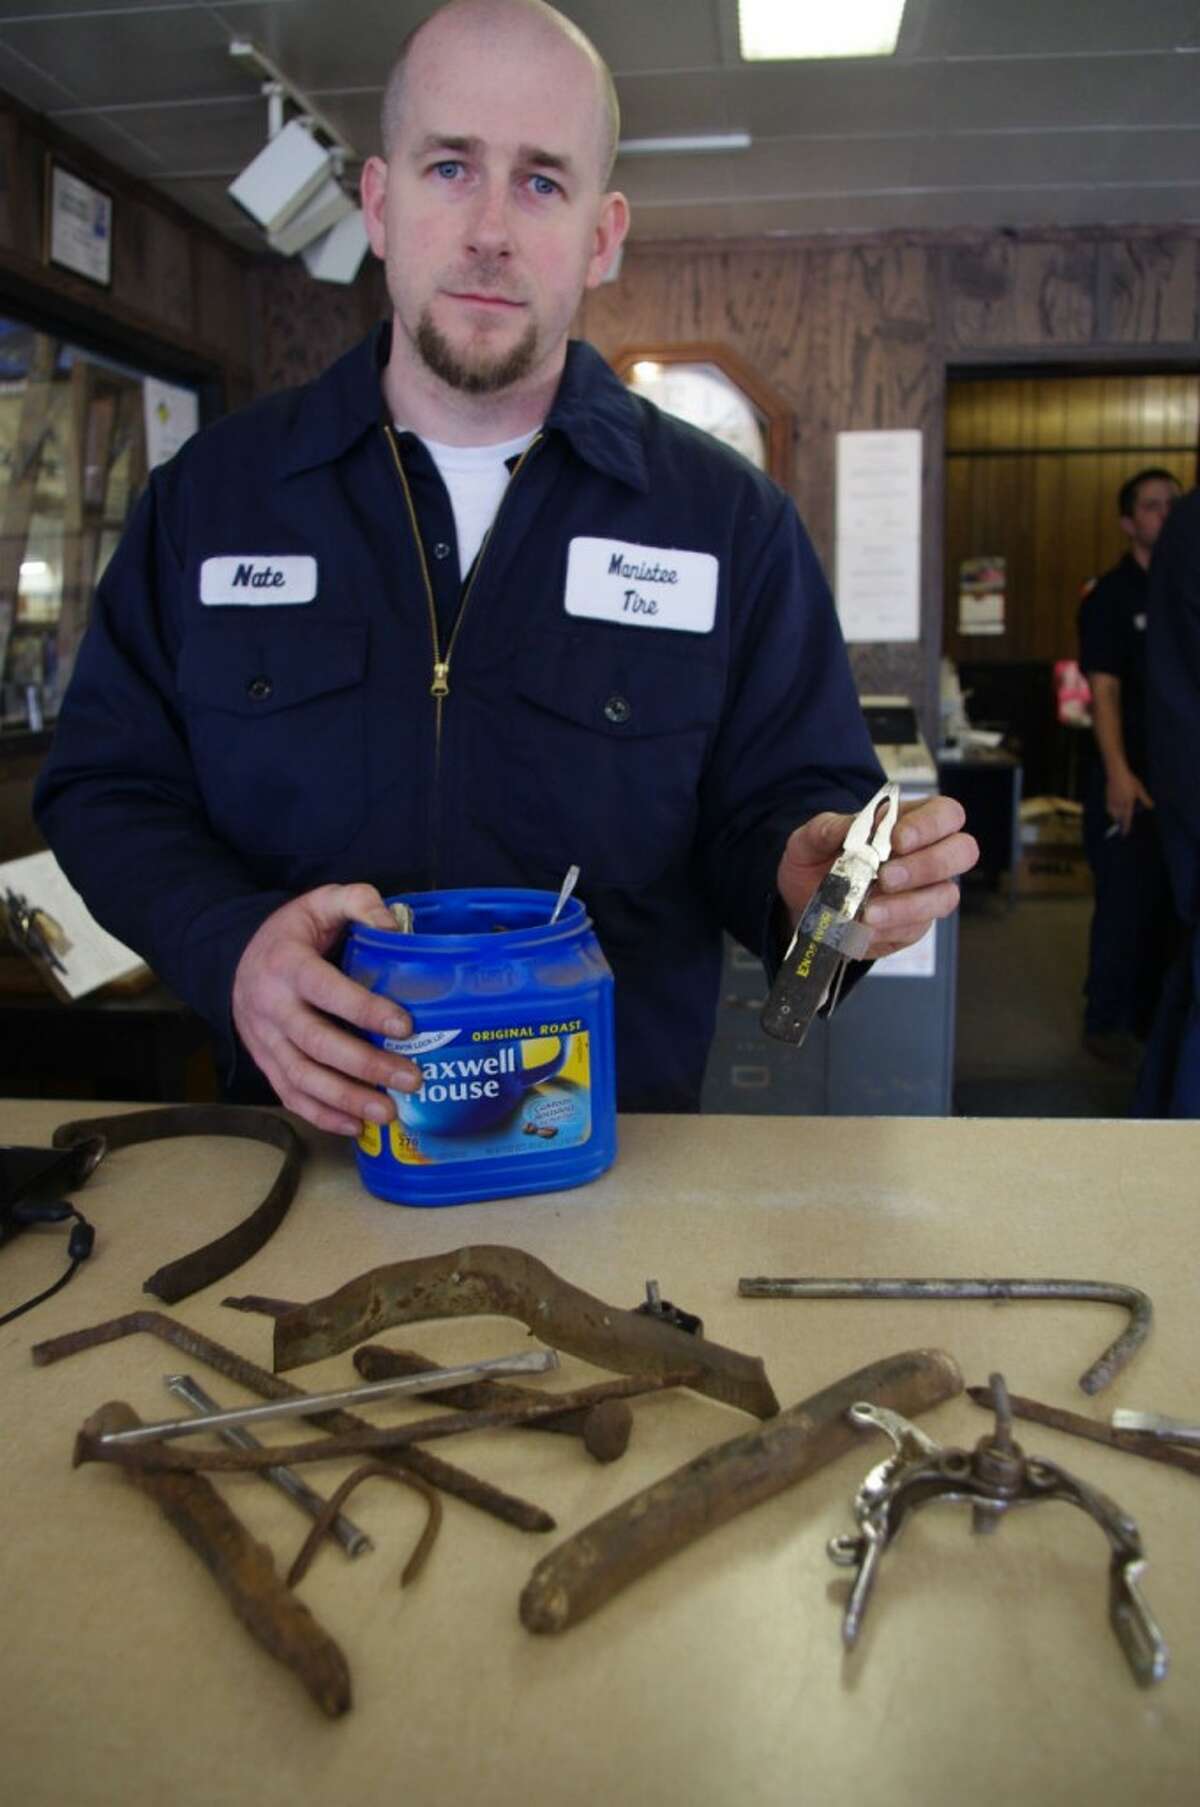 Nate Miller, owner of Manistee Tire, is pictured in this file photo from 2012.